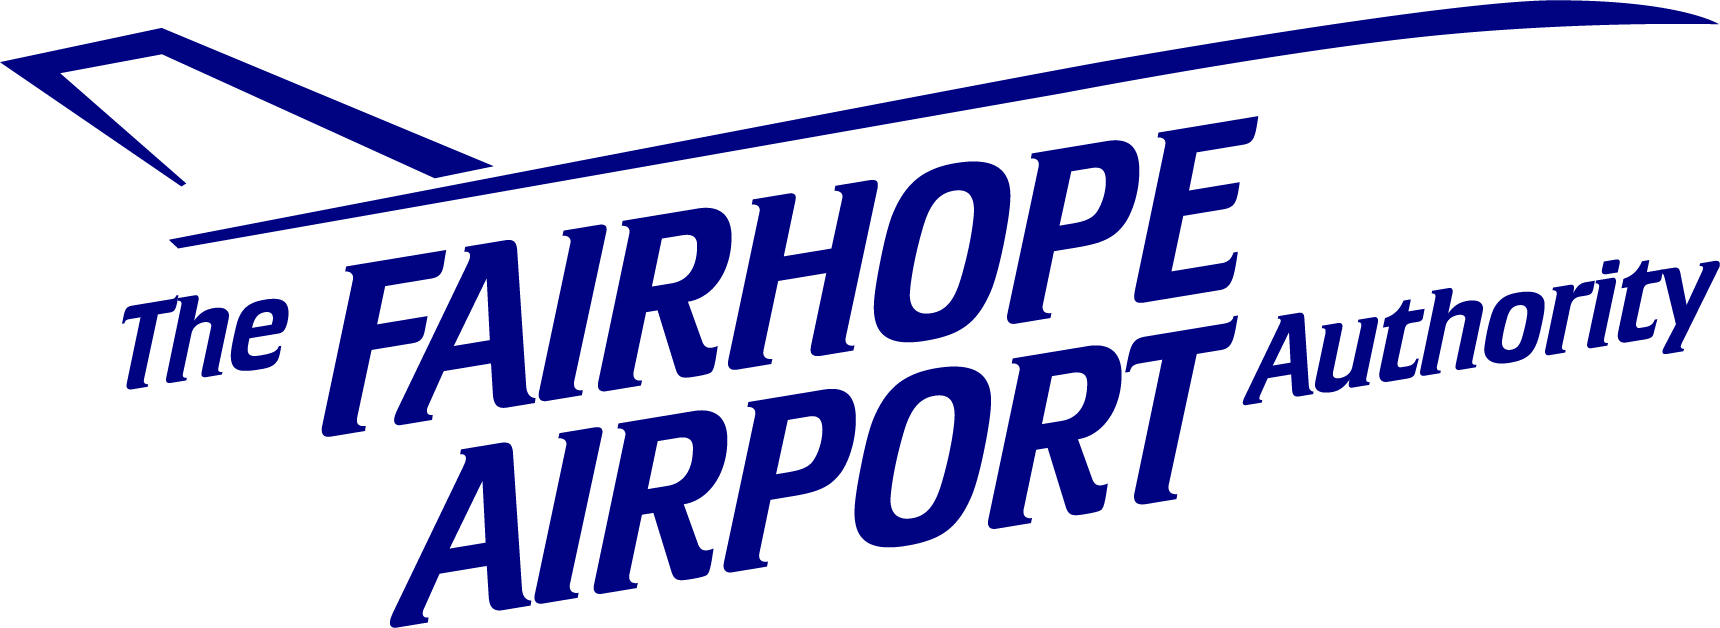 The Fairhope Airport Authority